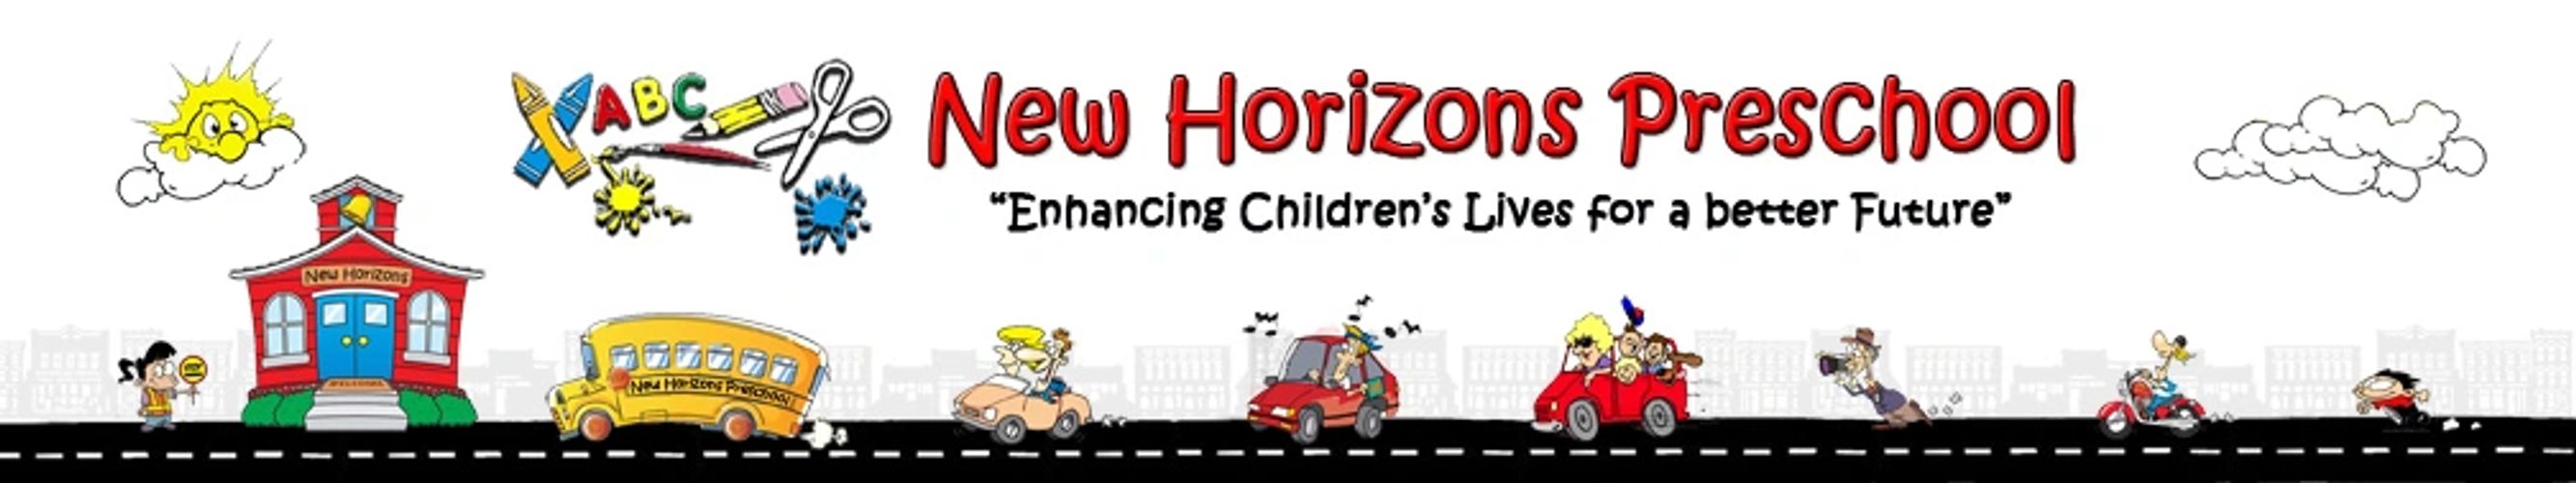 A banner with colorful illustrations and the New Horizons Preschool I & II logo